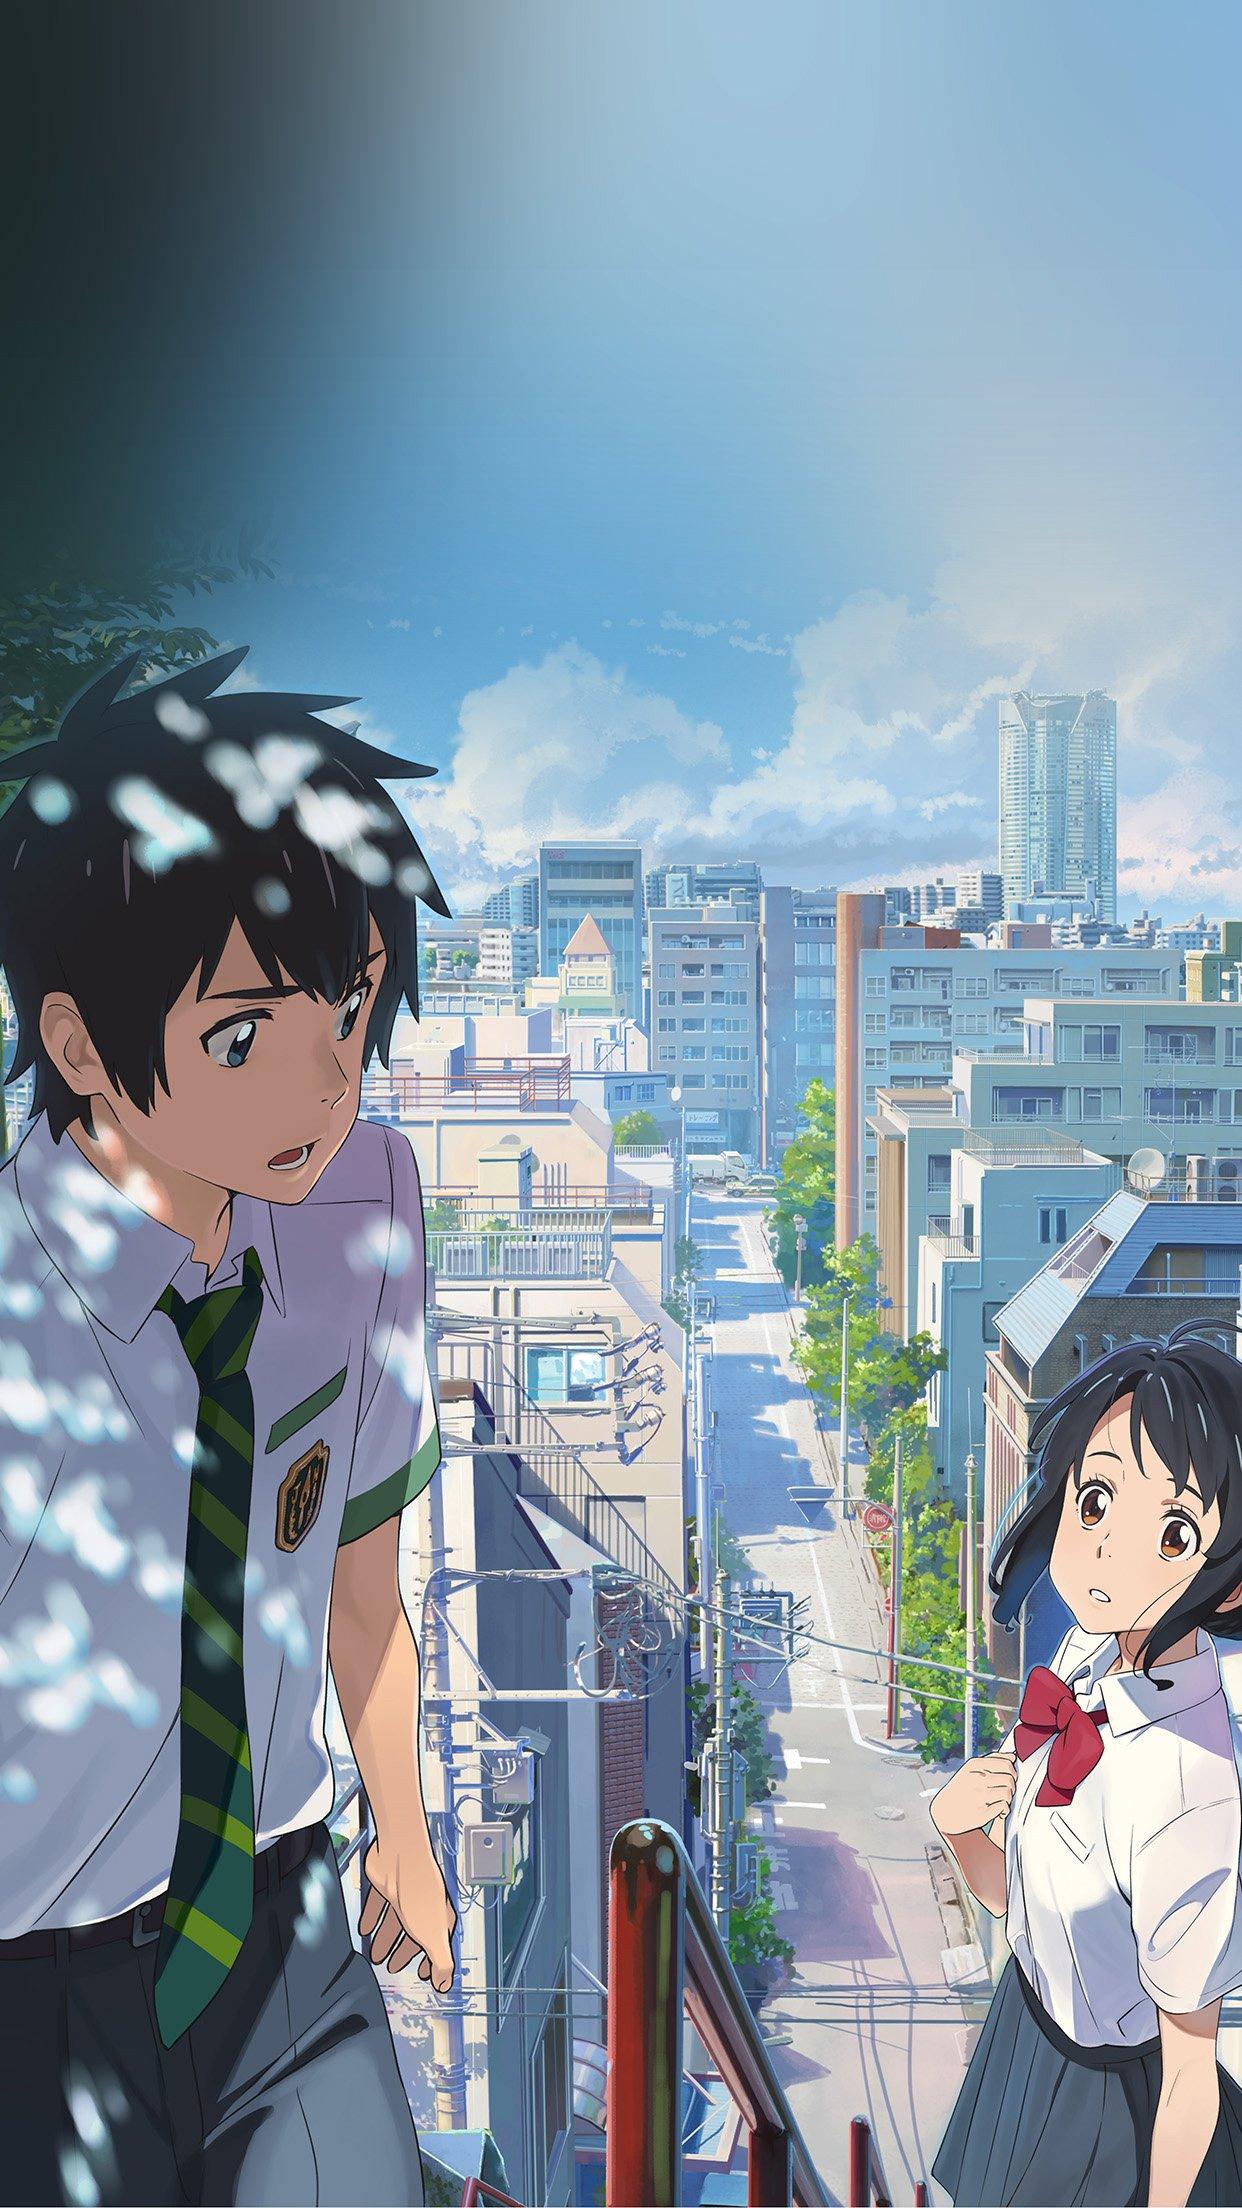 iPhone7 wallpaper. yourname anime